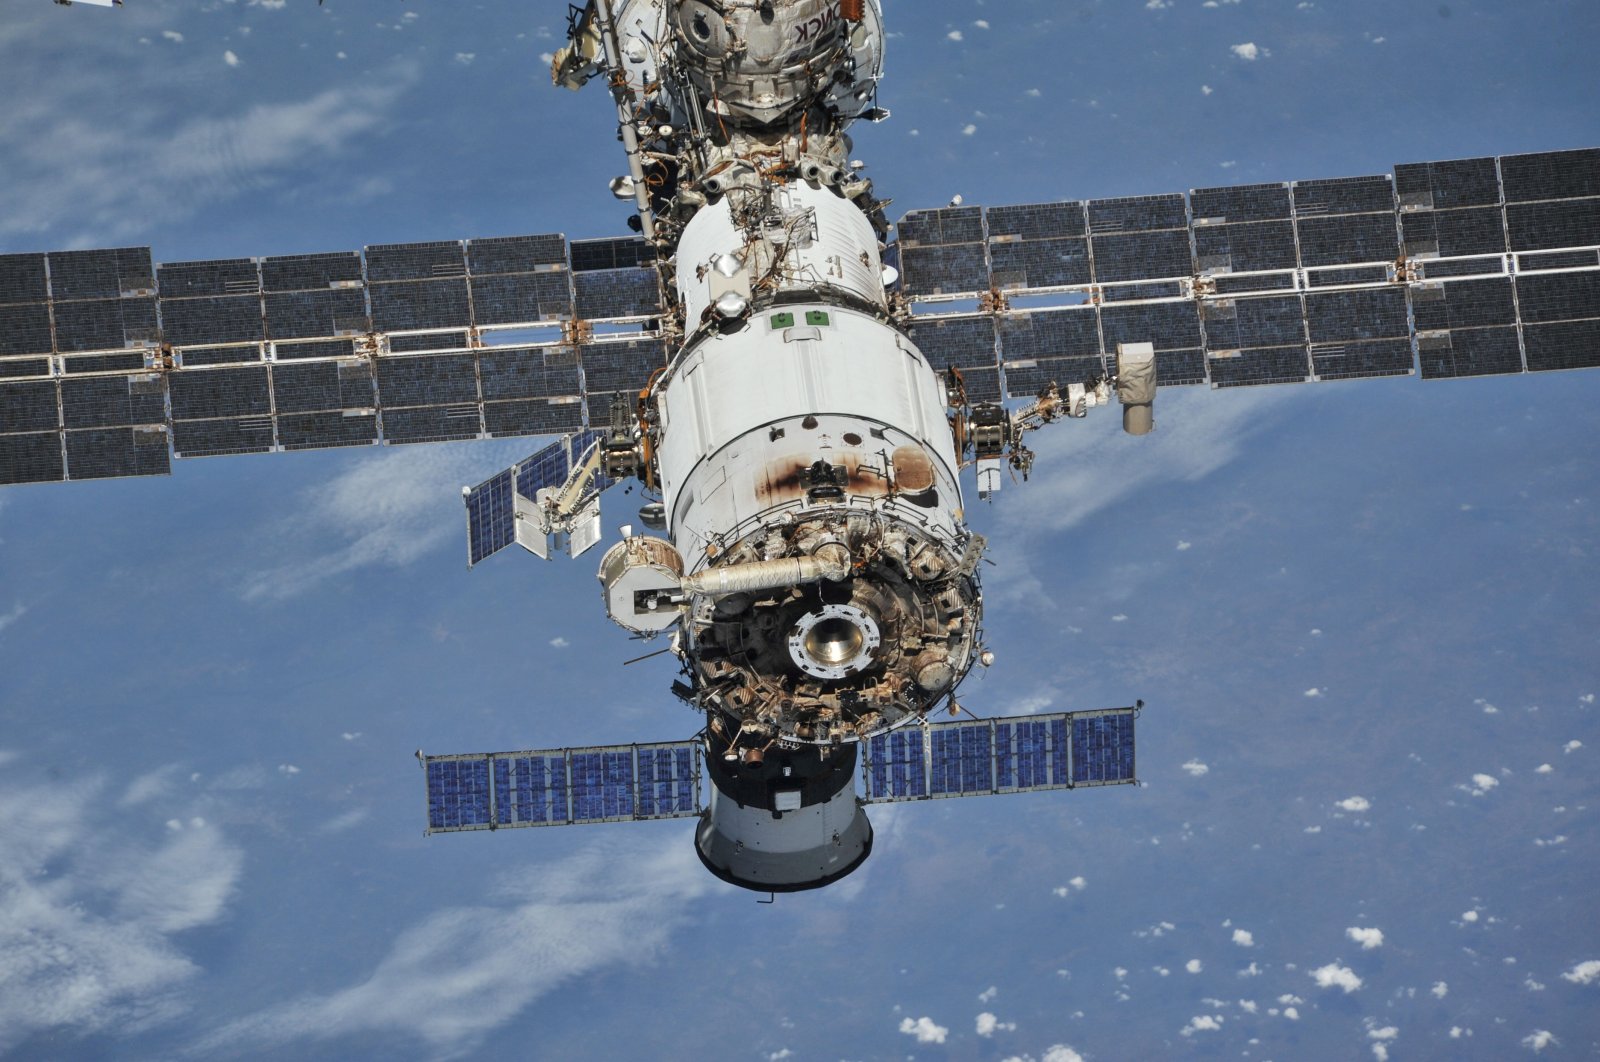 The International Space Station (ISS) photographed by Expedition 56 crew members from a Soyuz spacecraft after undocking, Oct. 4, 2018. (Reuters File Photo)